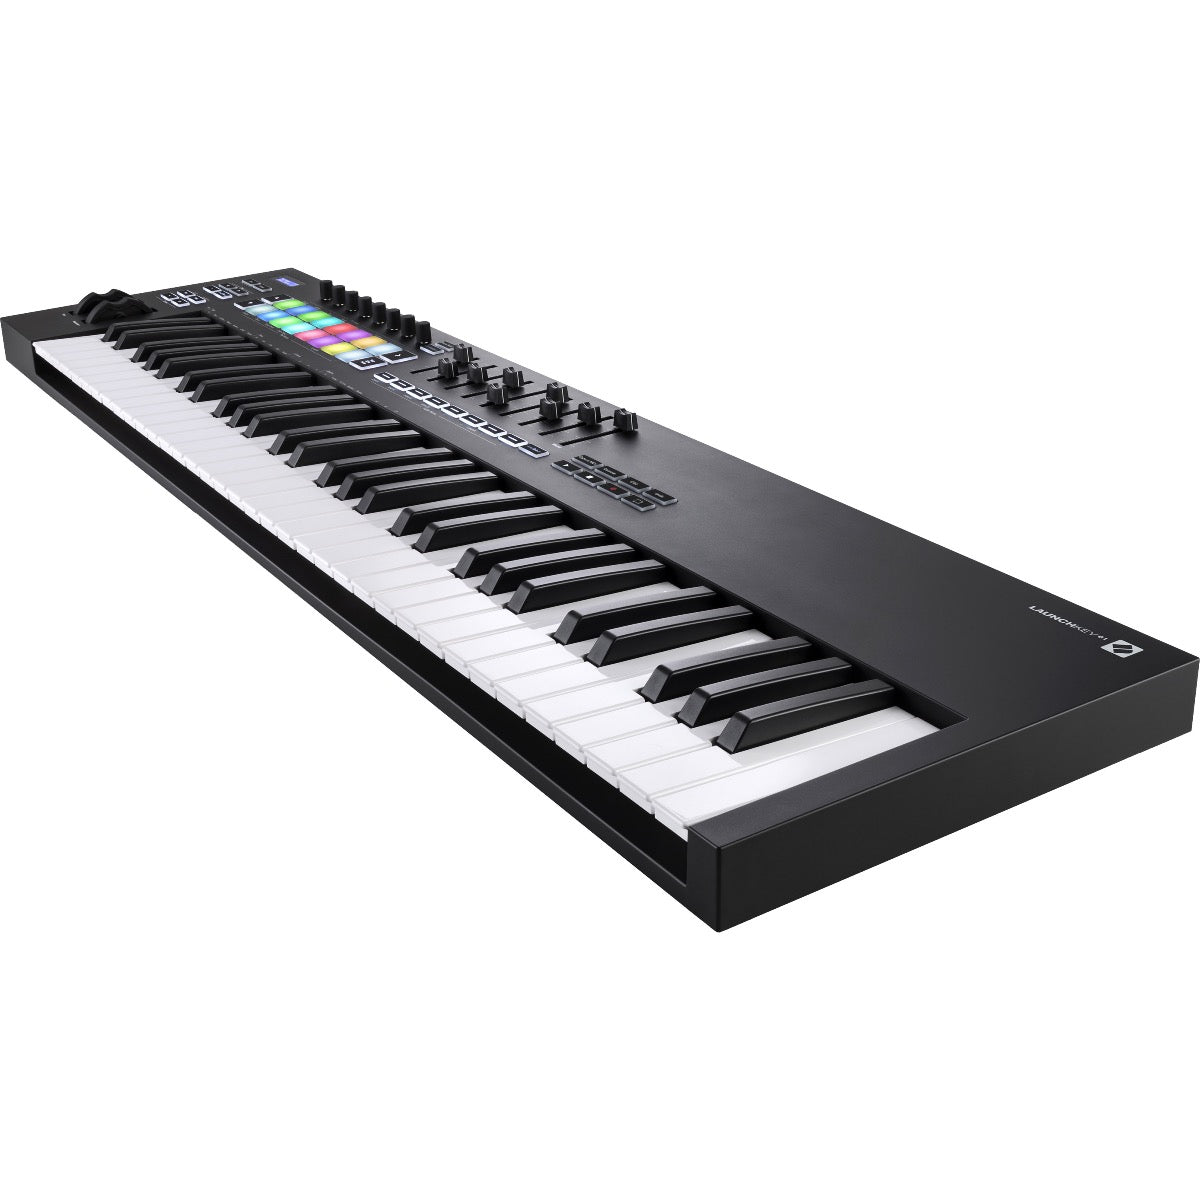 3/4 view of Novation Launchkey 61 MK3 Keyboard Controller showing top, front and right side